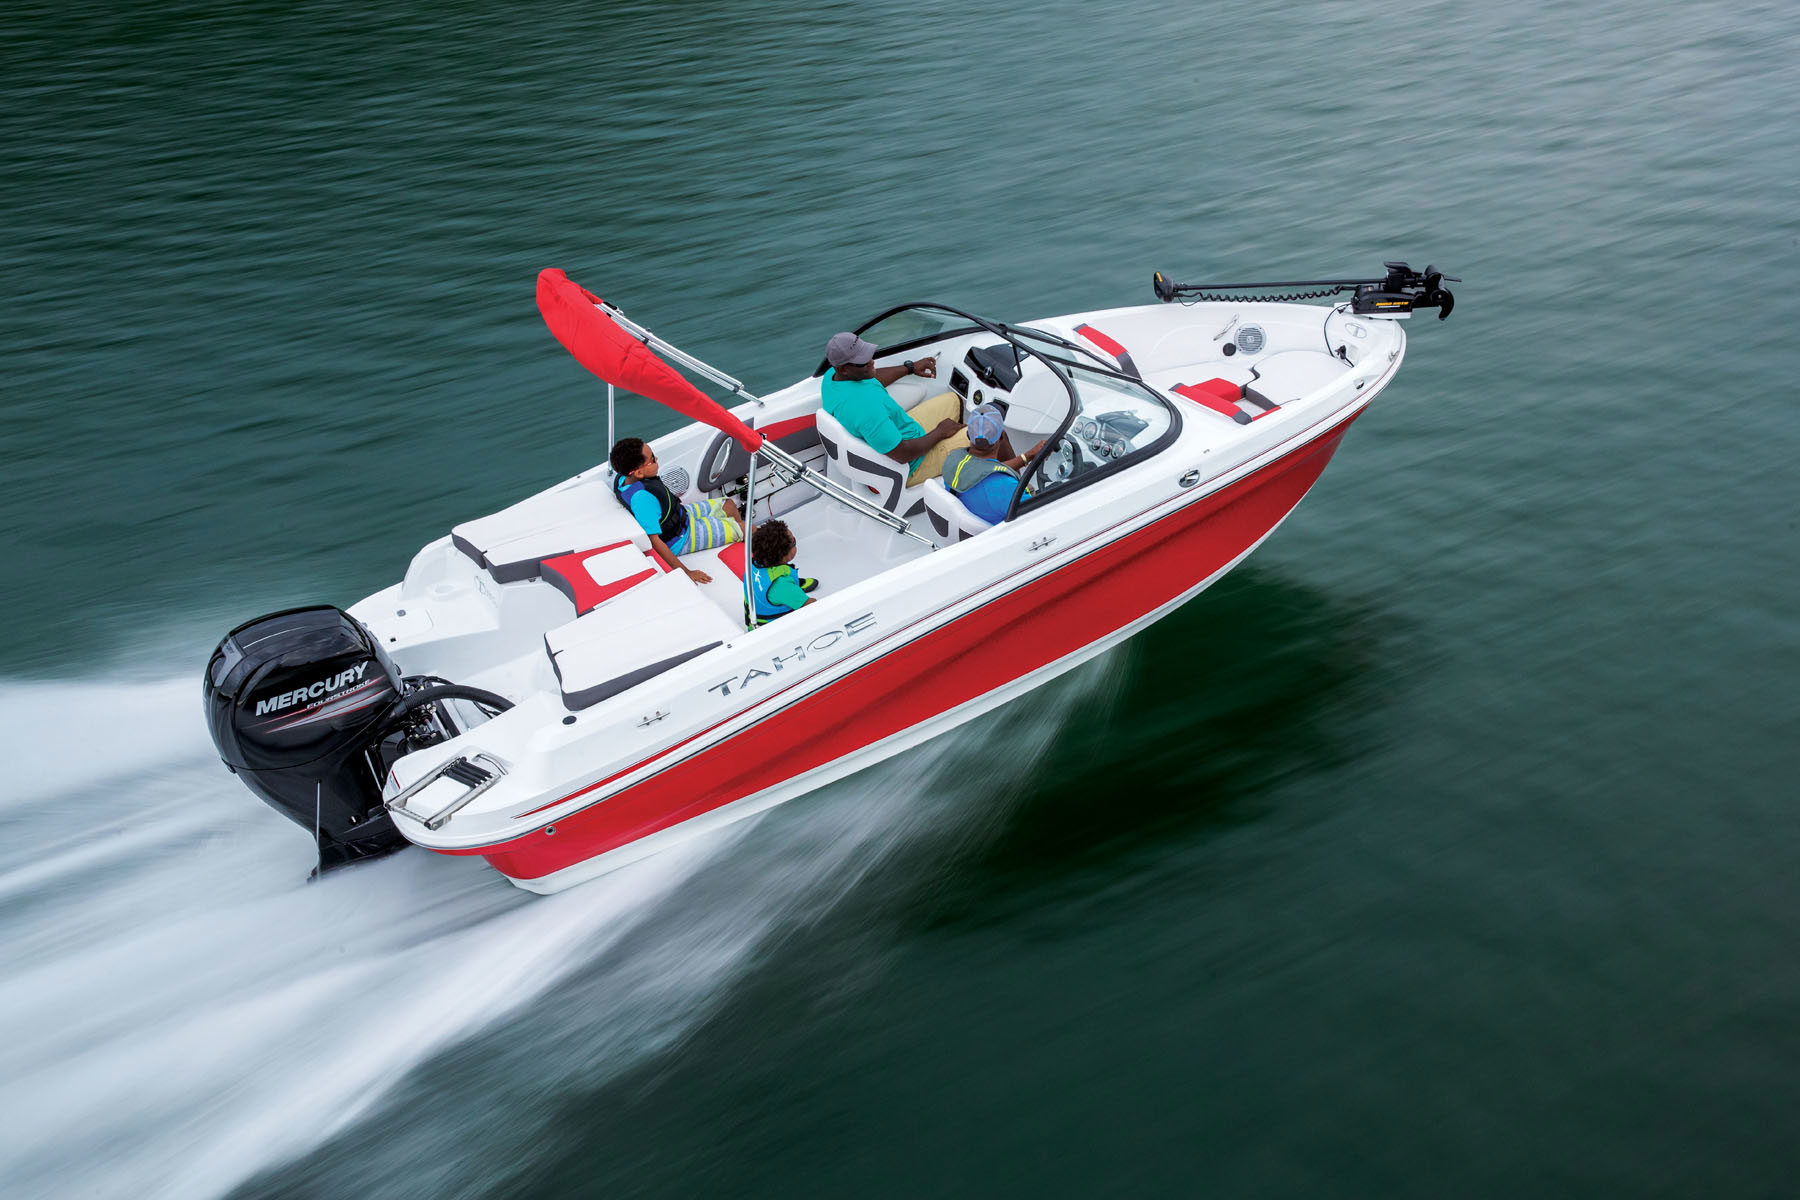 Tahoe 200 S: Prices, Specs, Reviews and Sales Information - itBoat